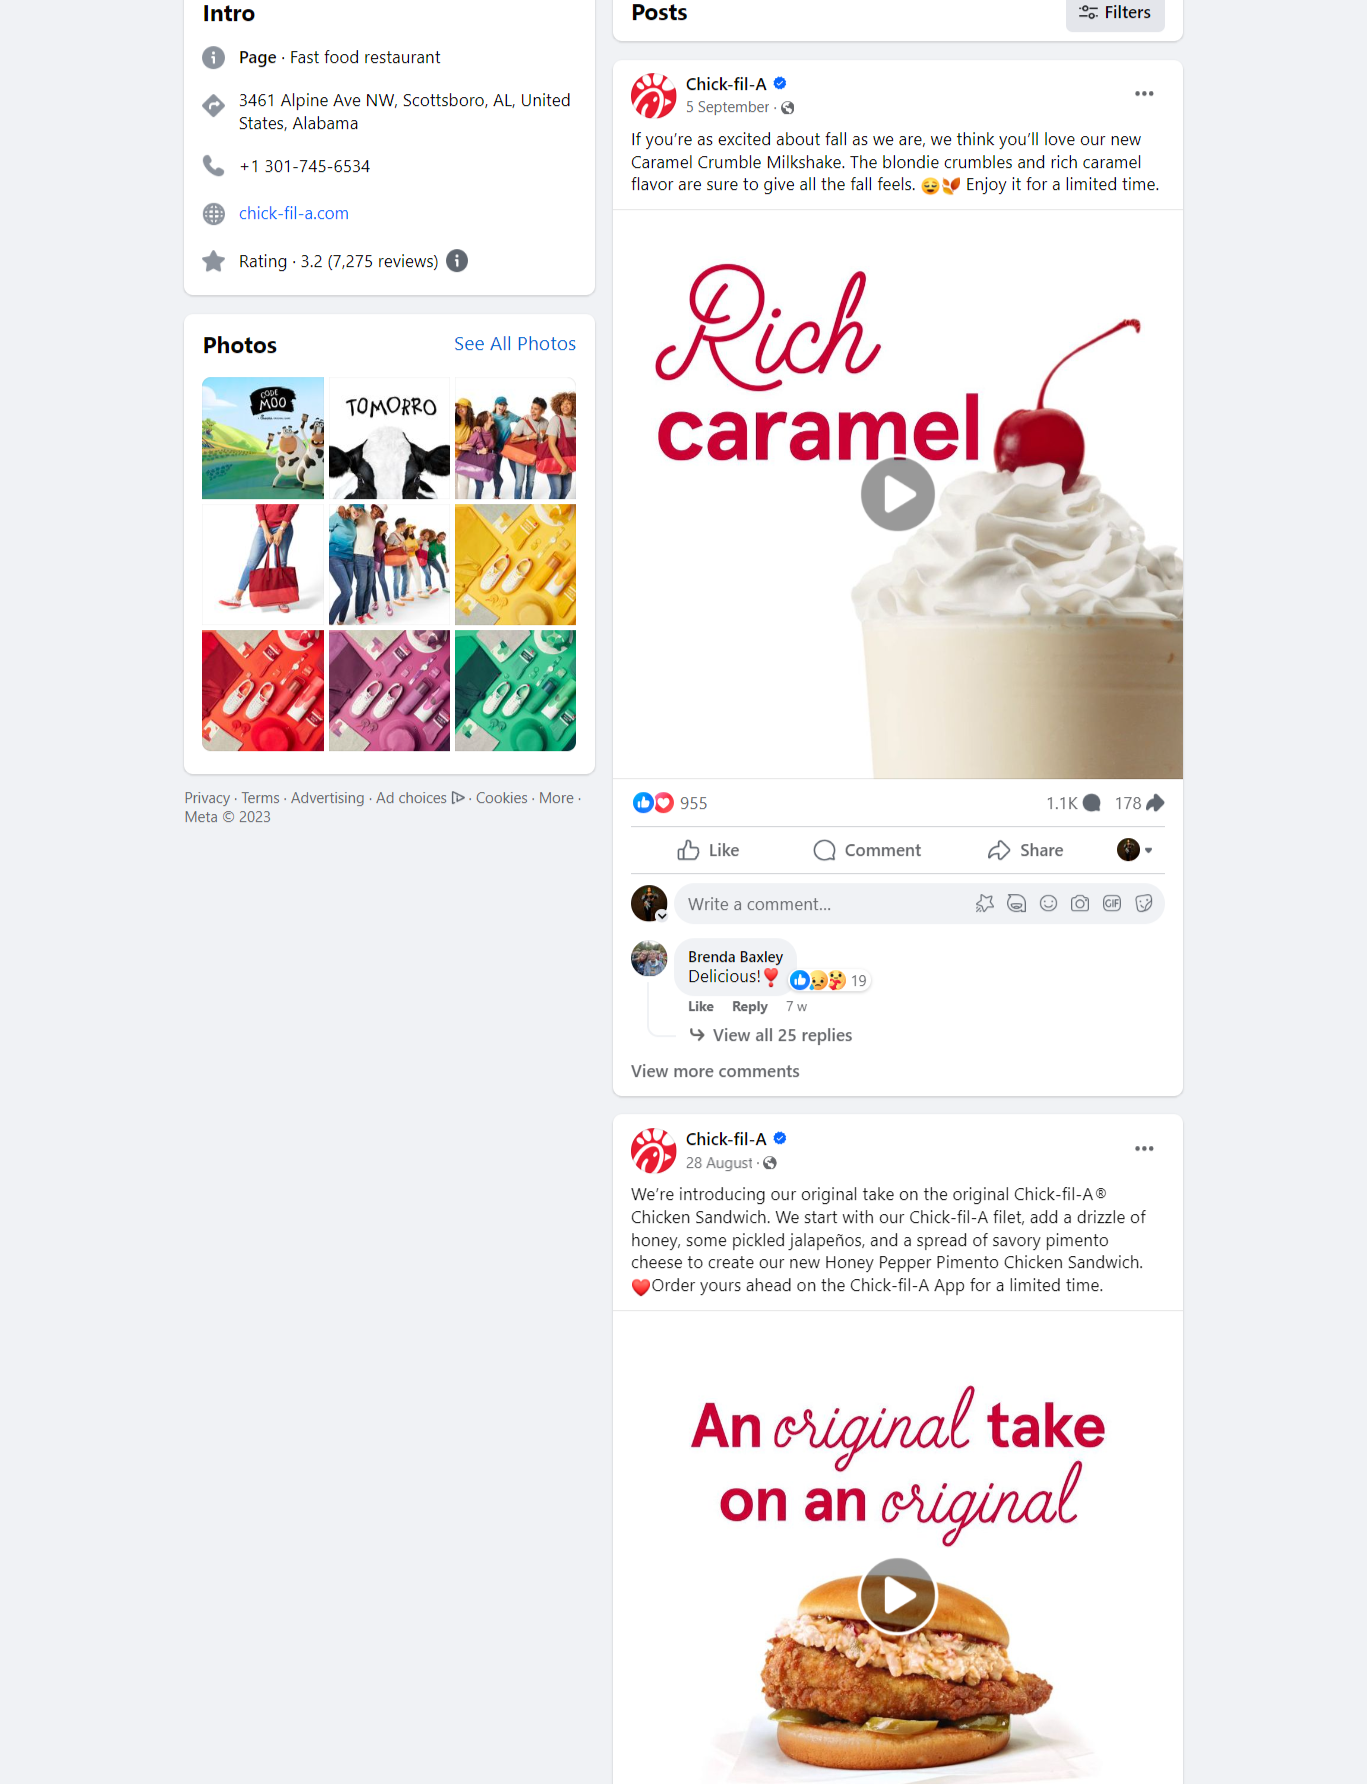 One of Chick-fil-A marketing strategies is interacting with customers on Facebook and sharing content about its product offerings on its Facebook page